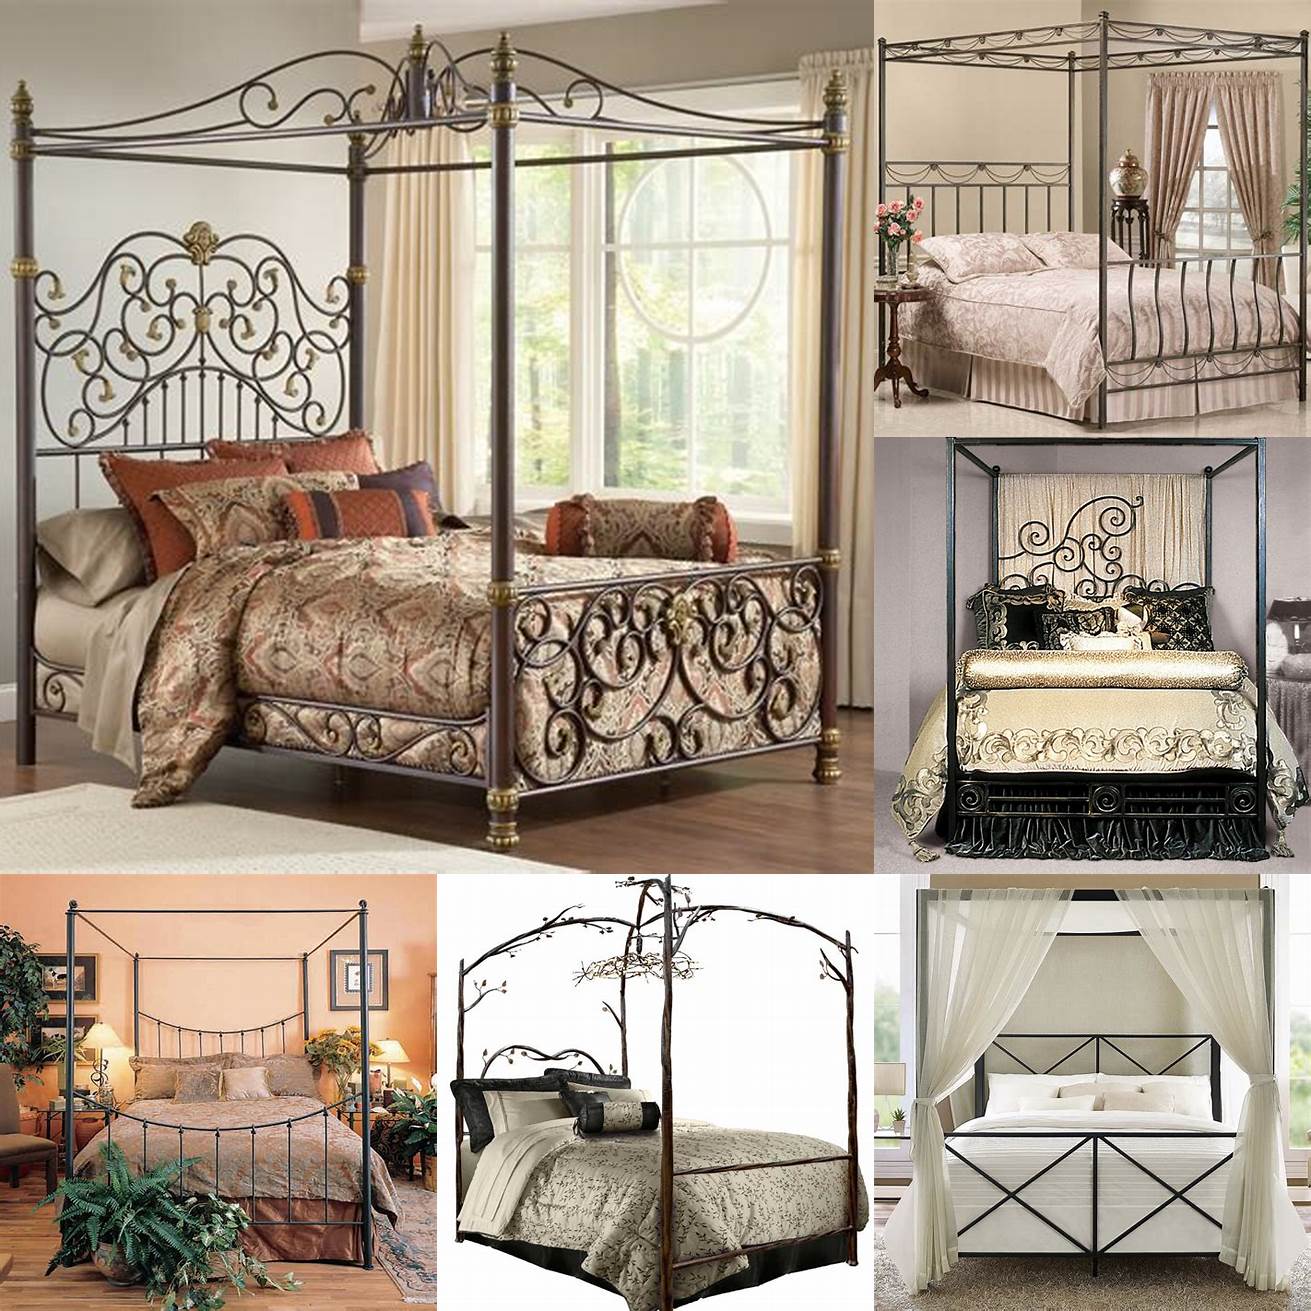 Iron canopy bed frame with romantic drapes